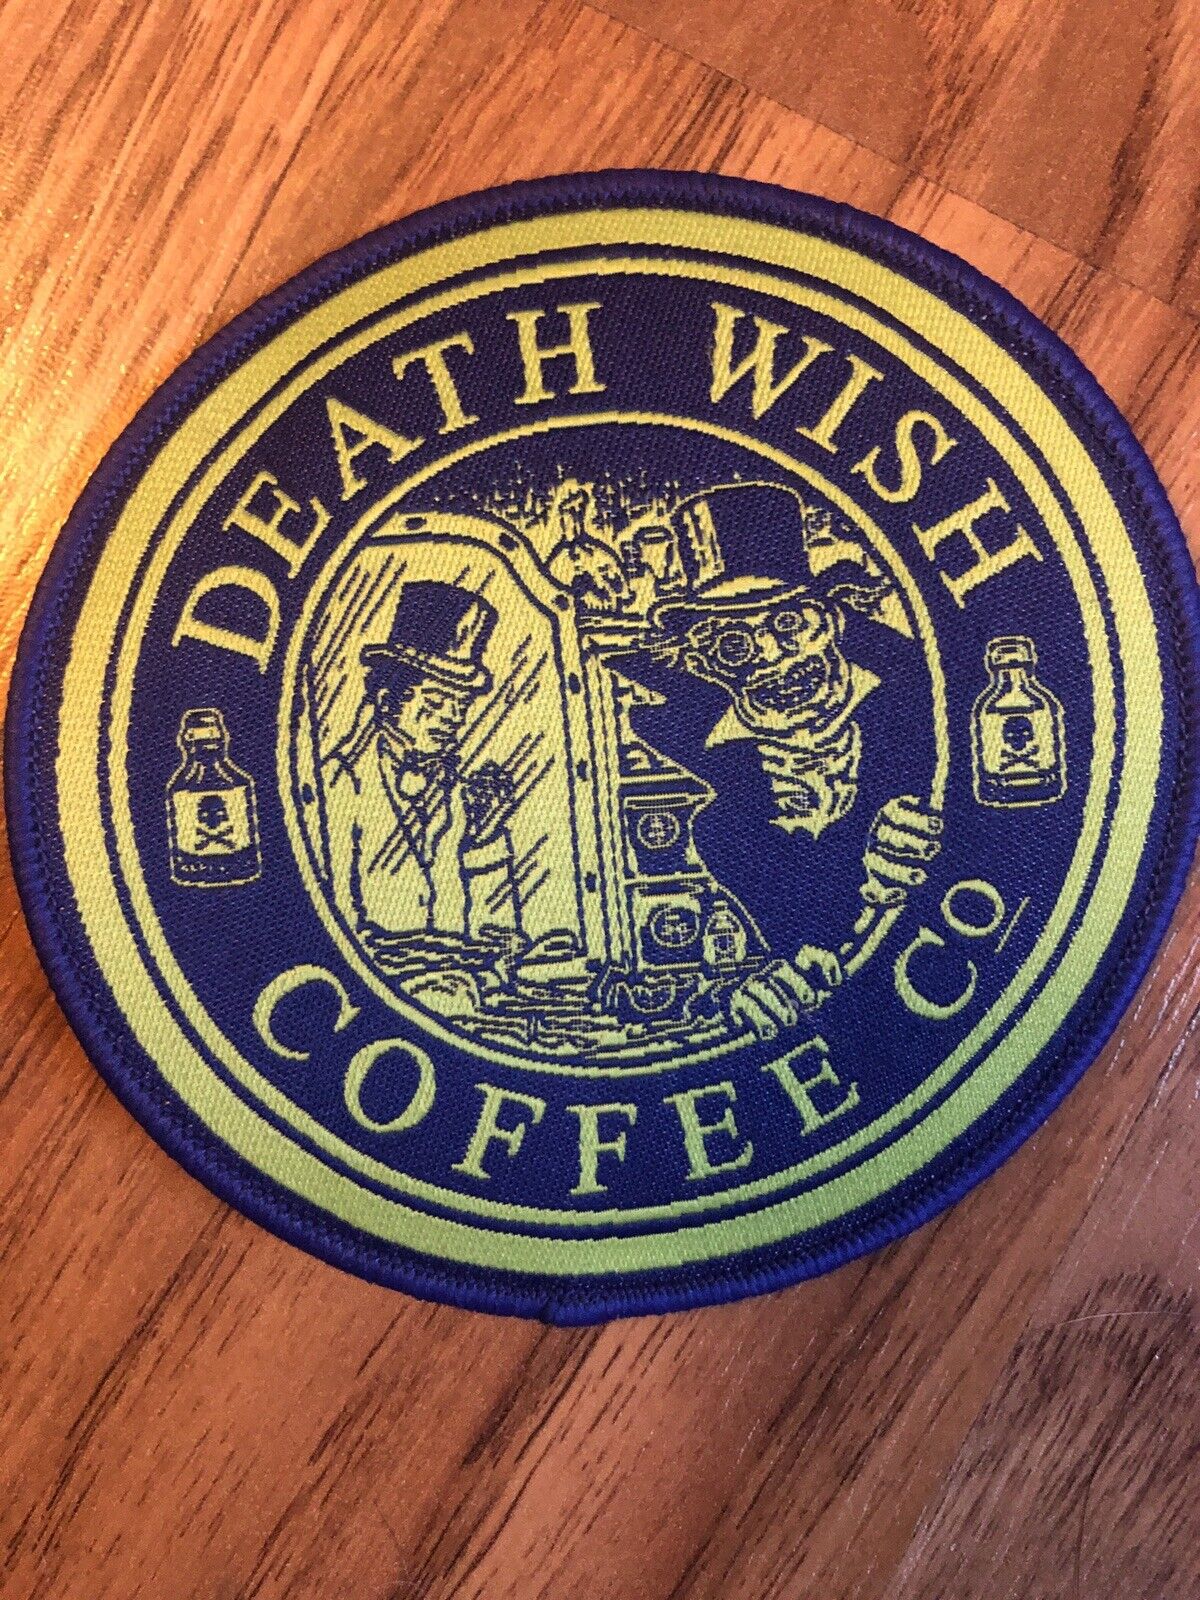 NEW DEATH WISH COFFEE OFFICIAL CLOTH PATCH DR. JEKYLL MR. HYDE HALLOWEEN 3.5